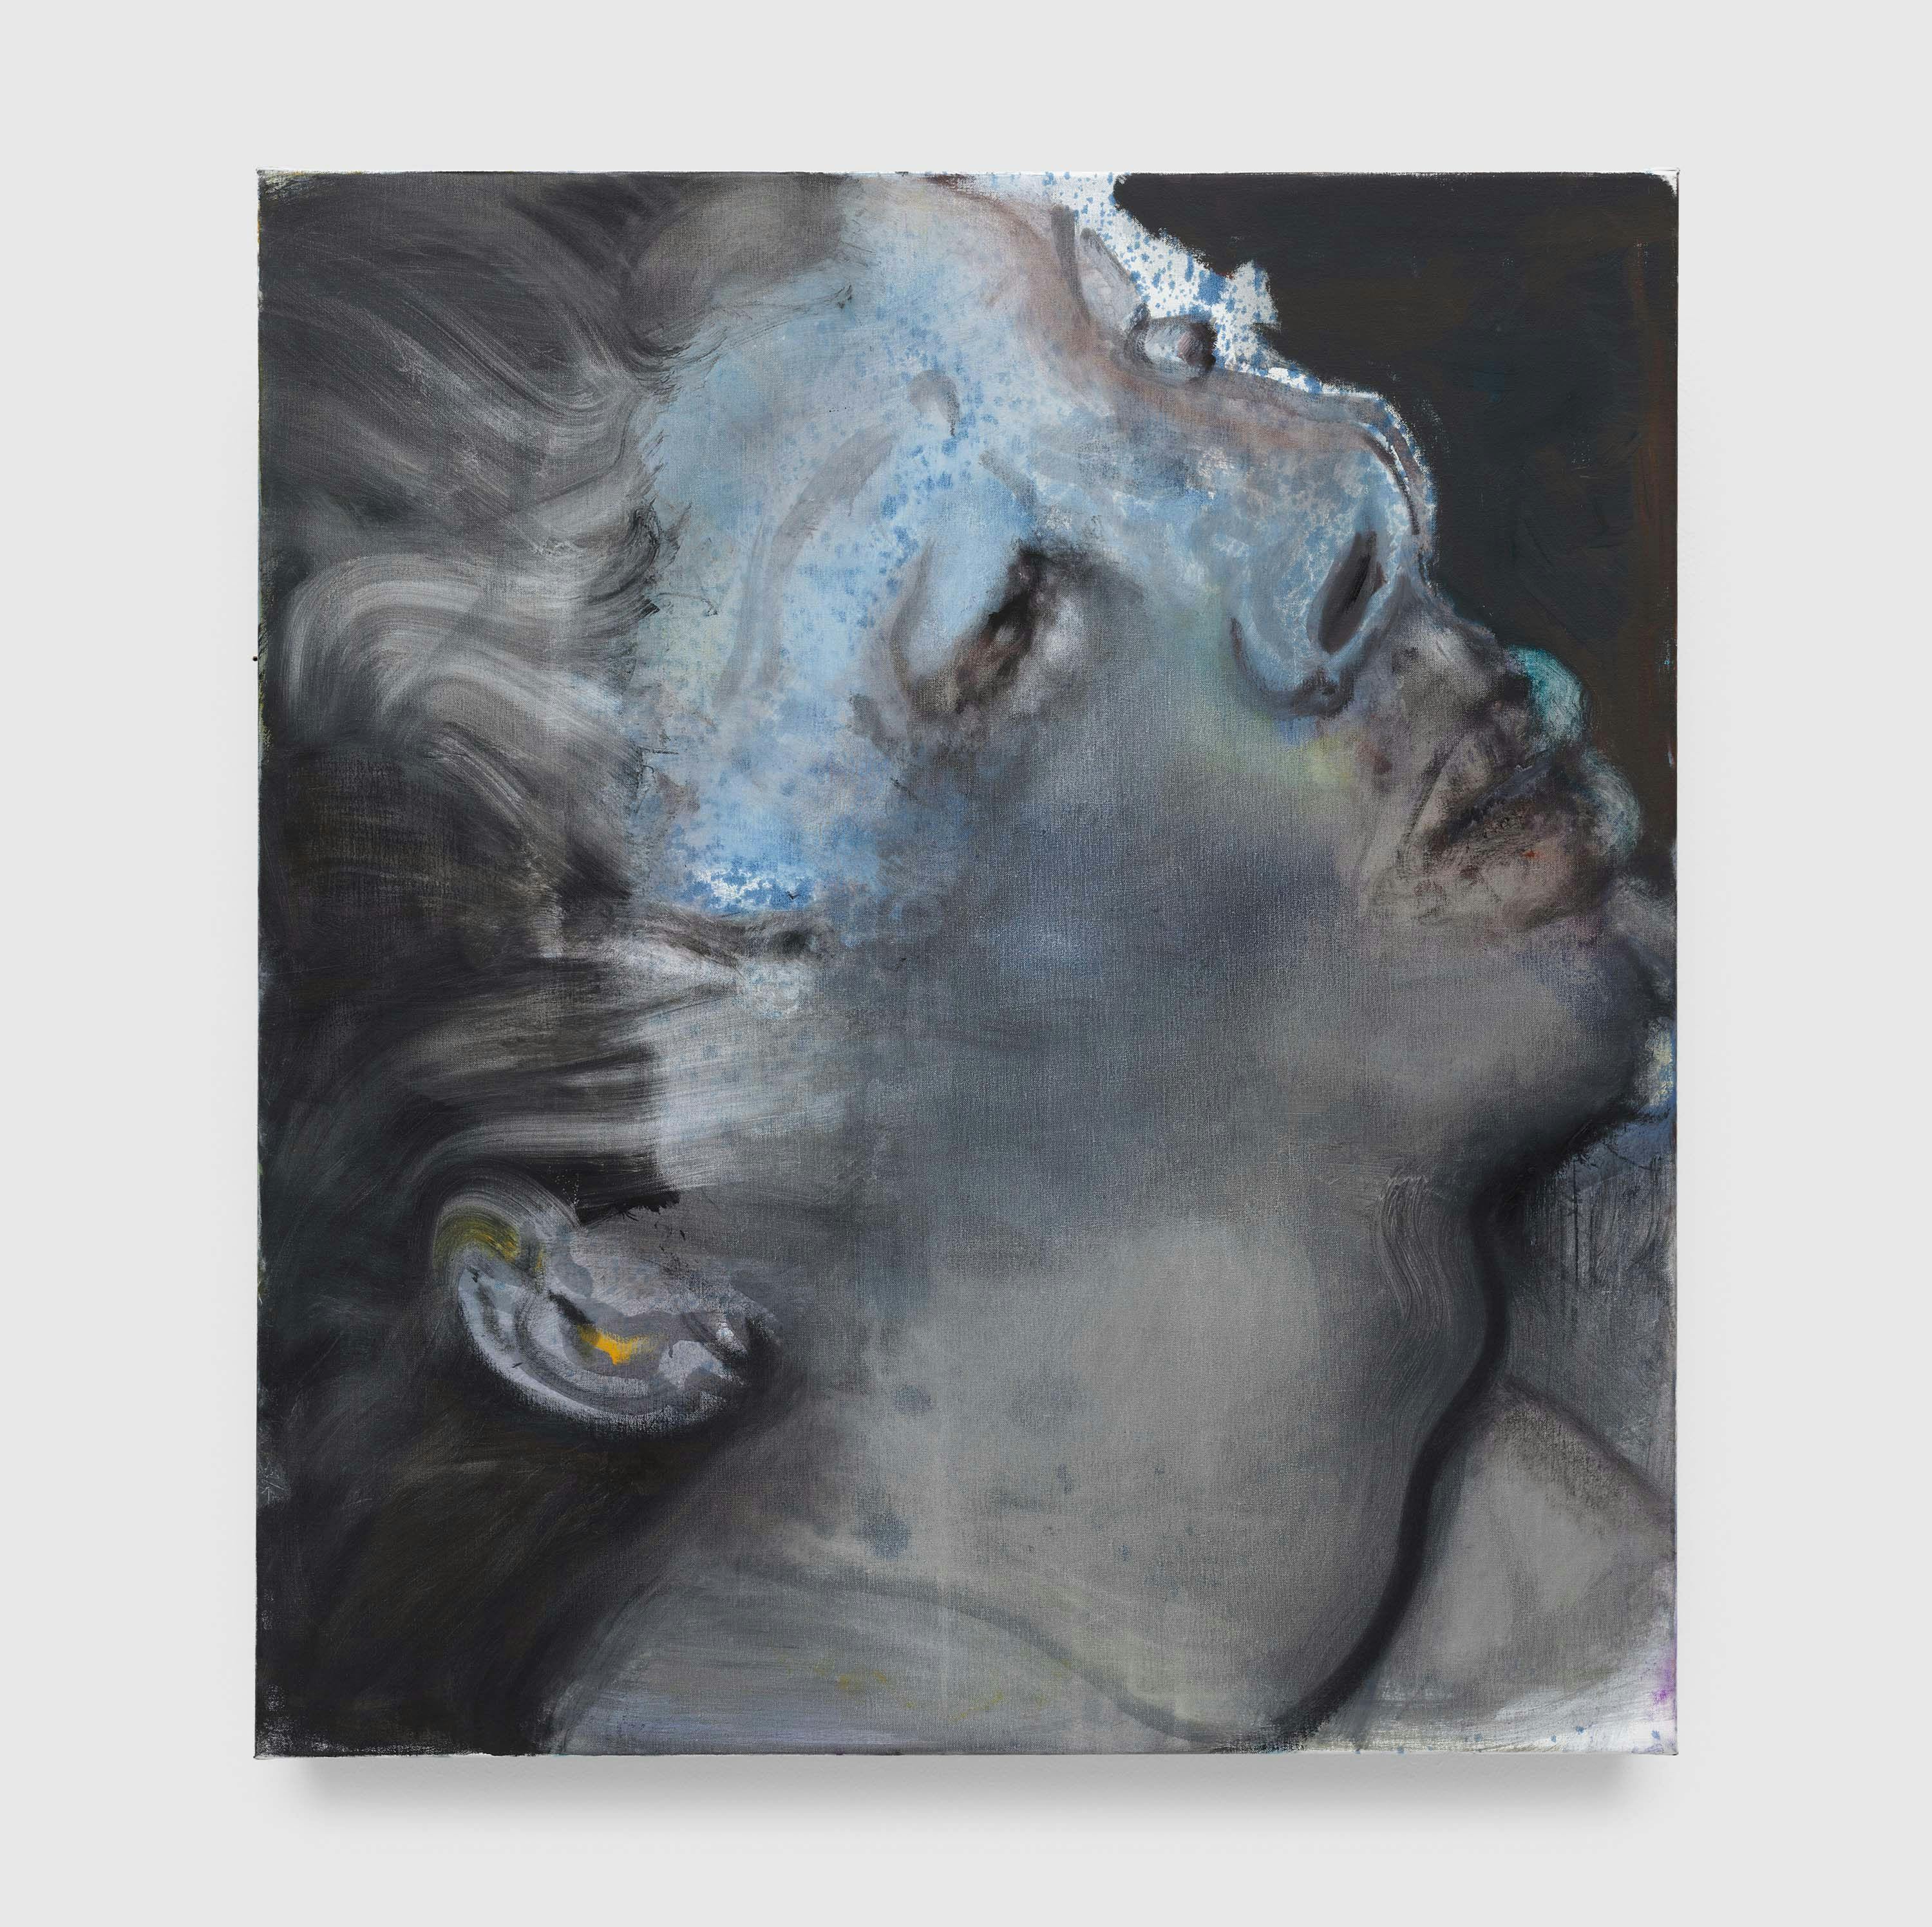 A painting by Marlene Dumas, titled IO, dated 2008.